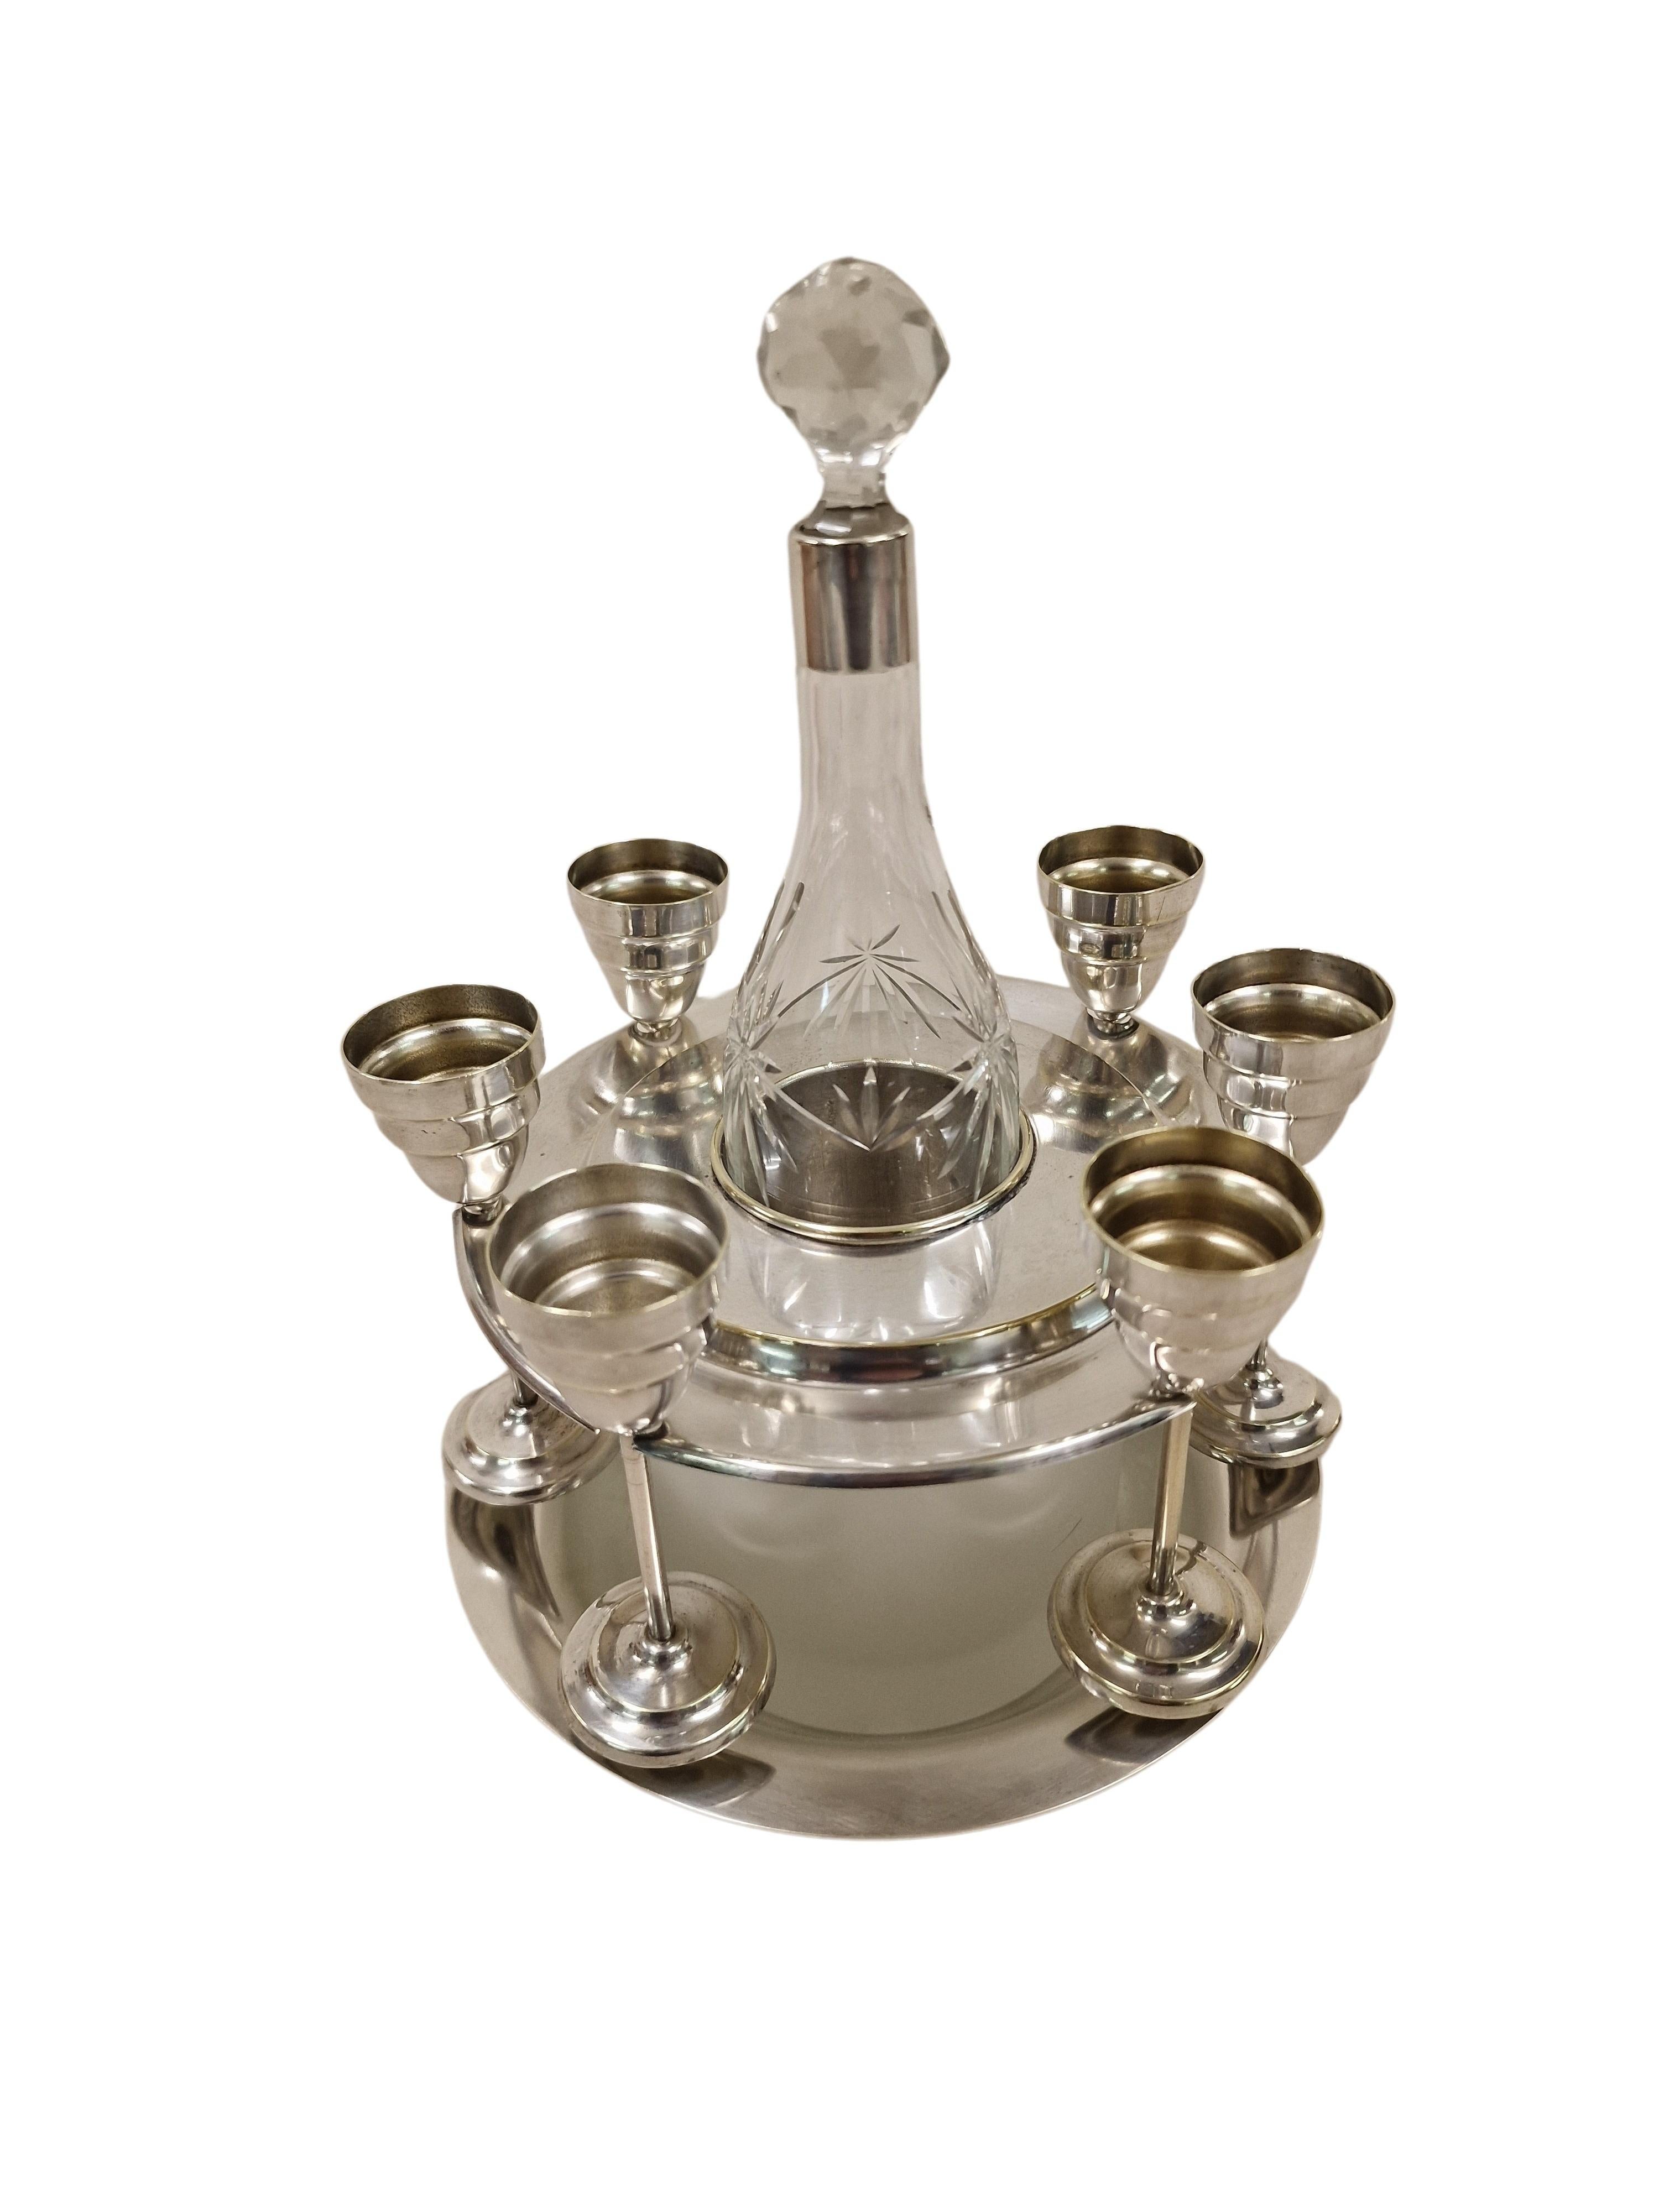 Wonderful, highly decorative liqueur set, made by the well-known German manufacturer WMF - Würtembergische Metallwarenfabrik, in the 1930s.

The set consits of a bottle, 6 small cups and a base with a cooler system, all made in elaborate design. The